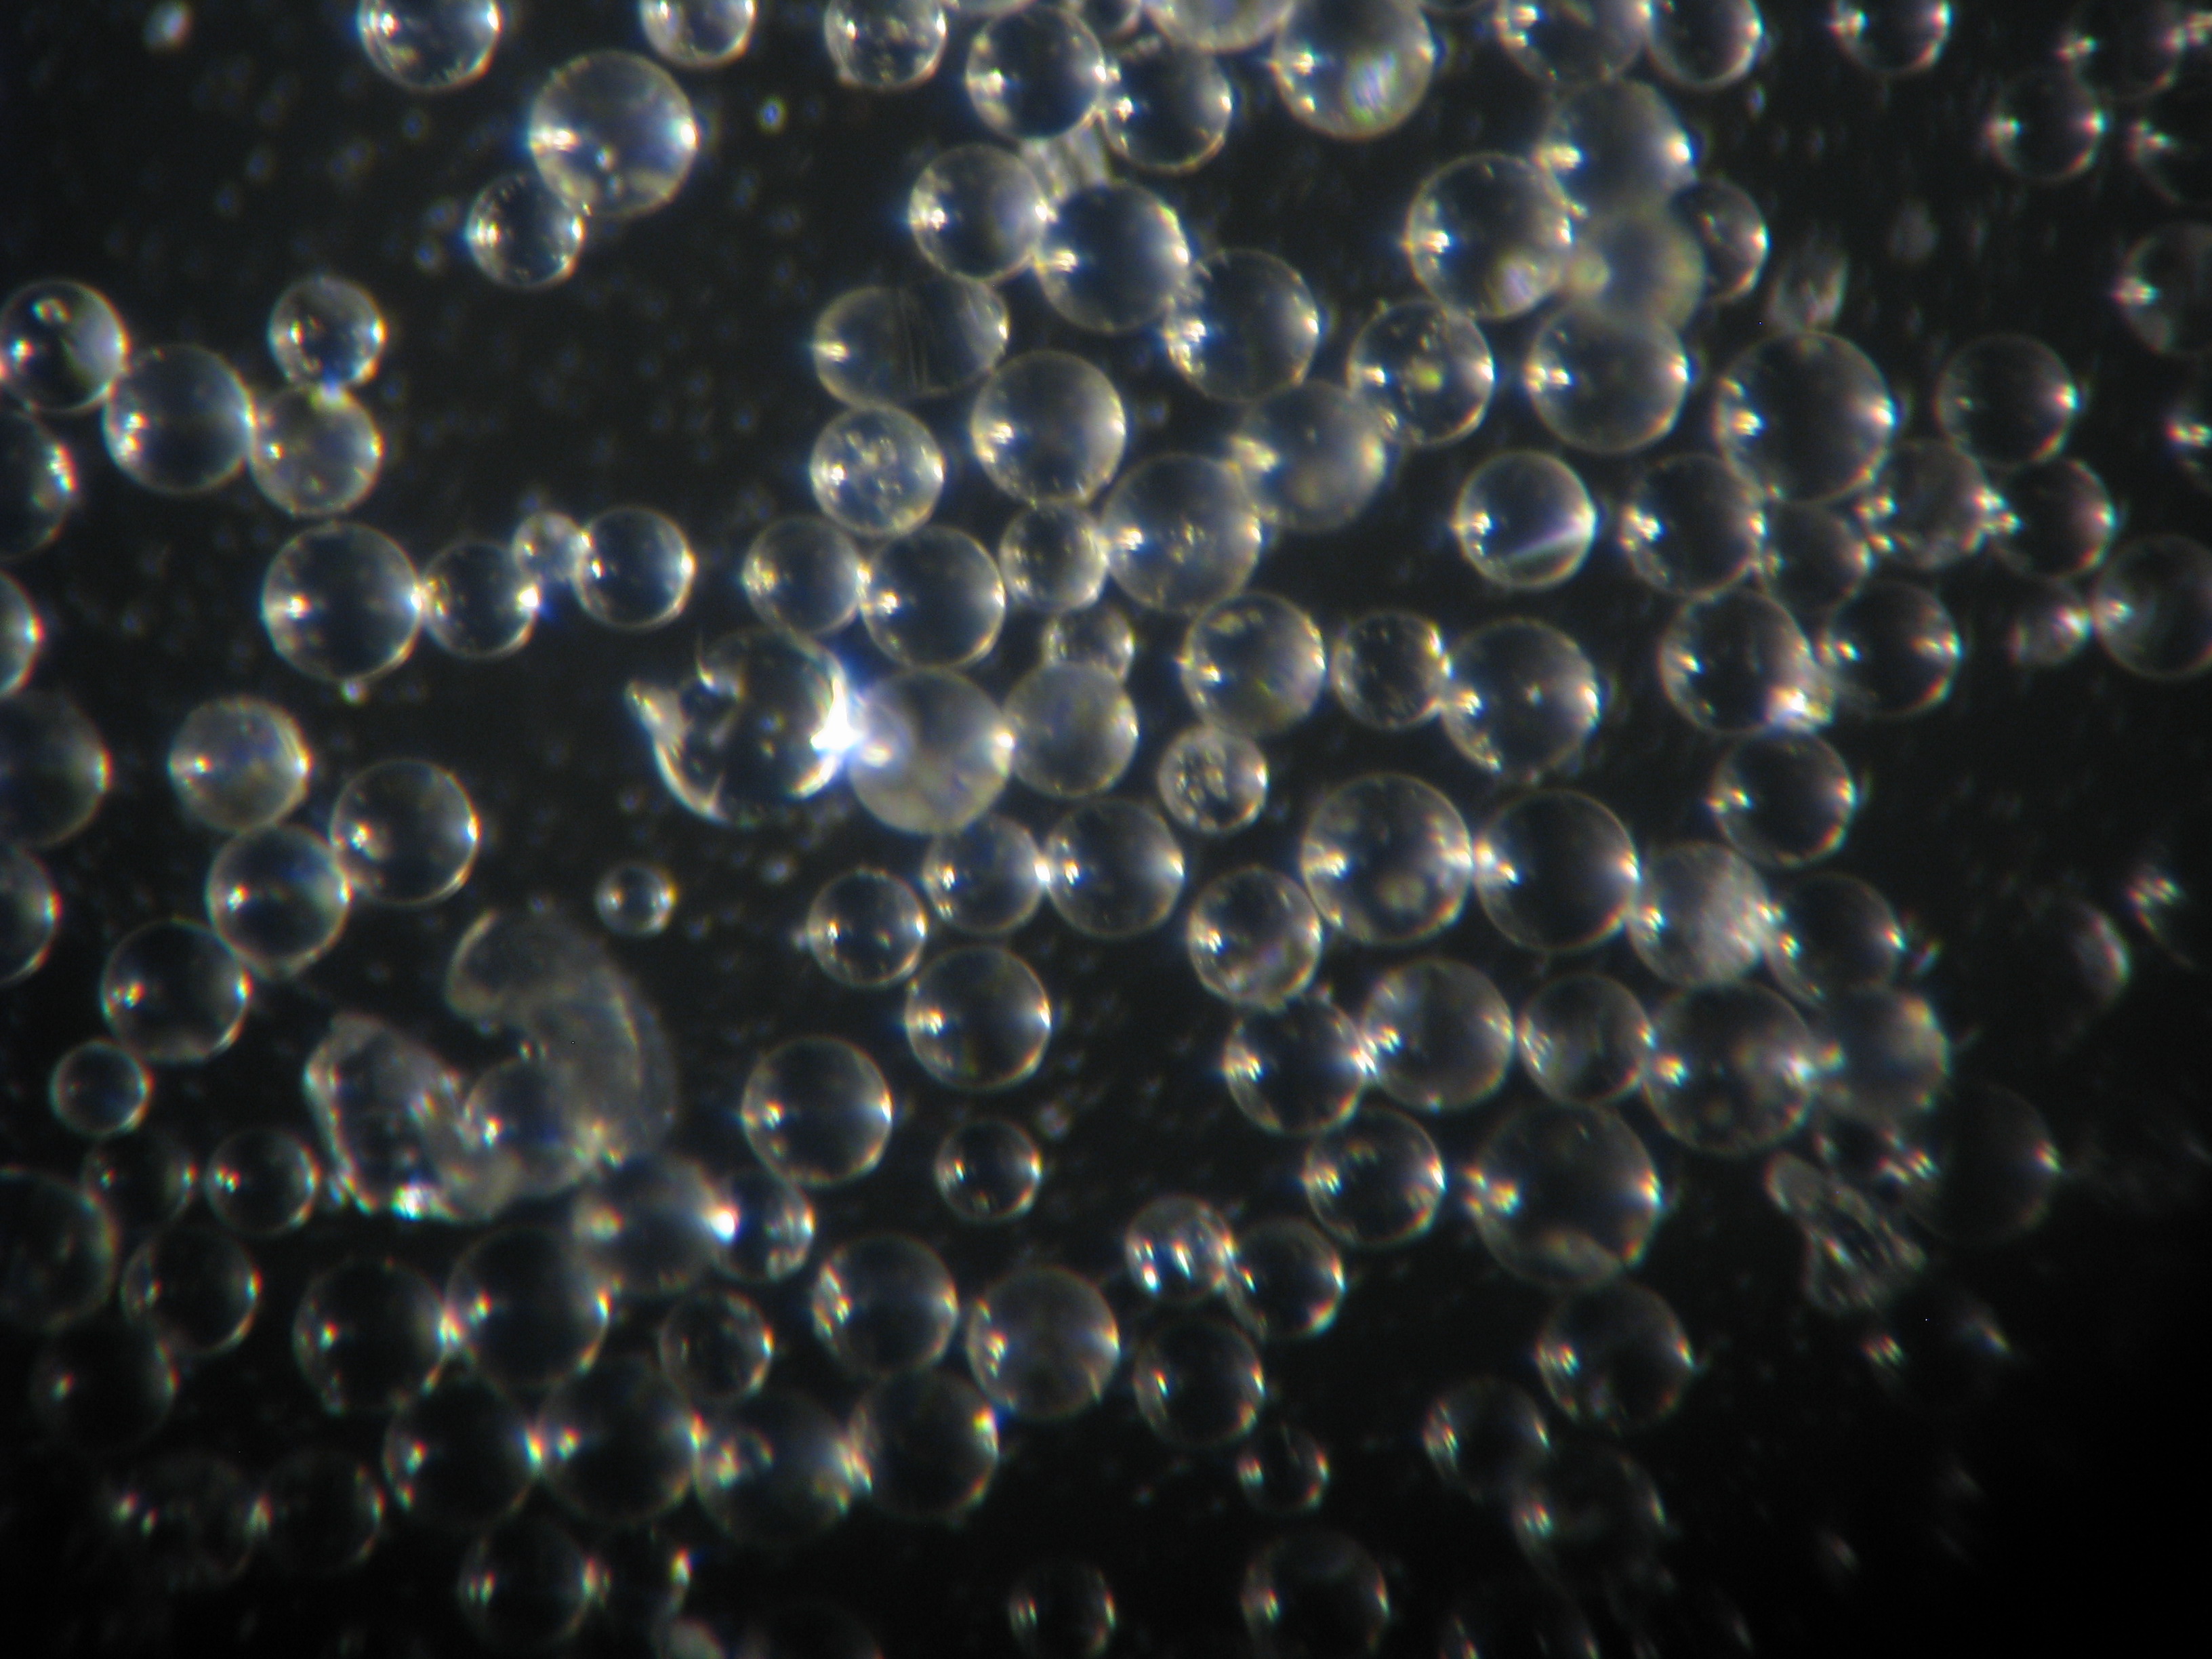 Glass bead abrasive media magnified